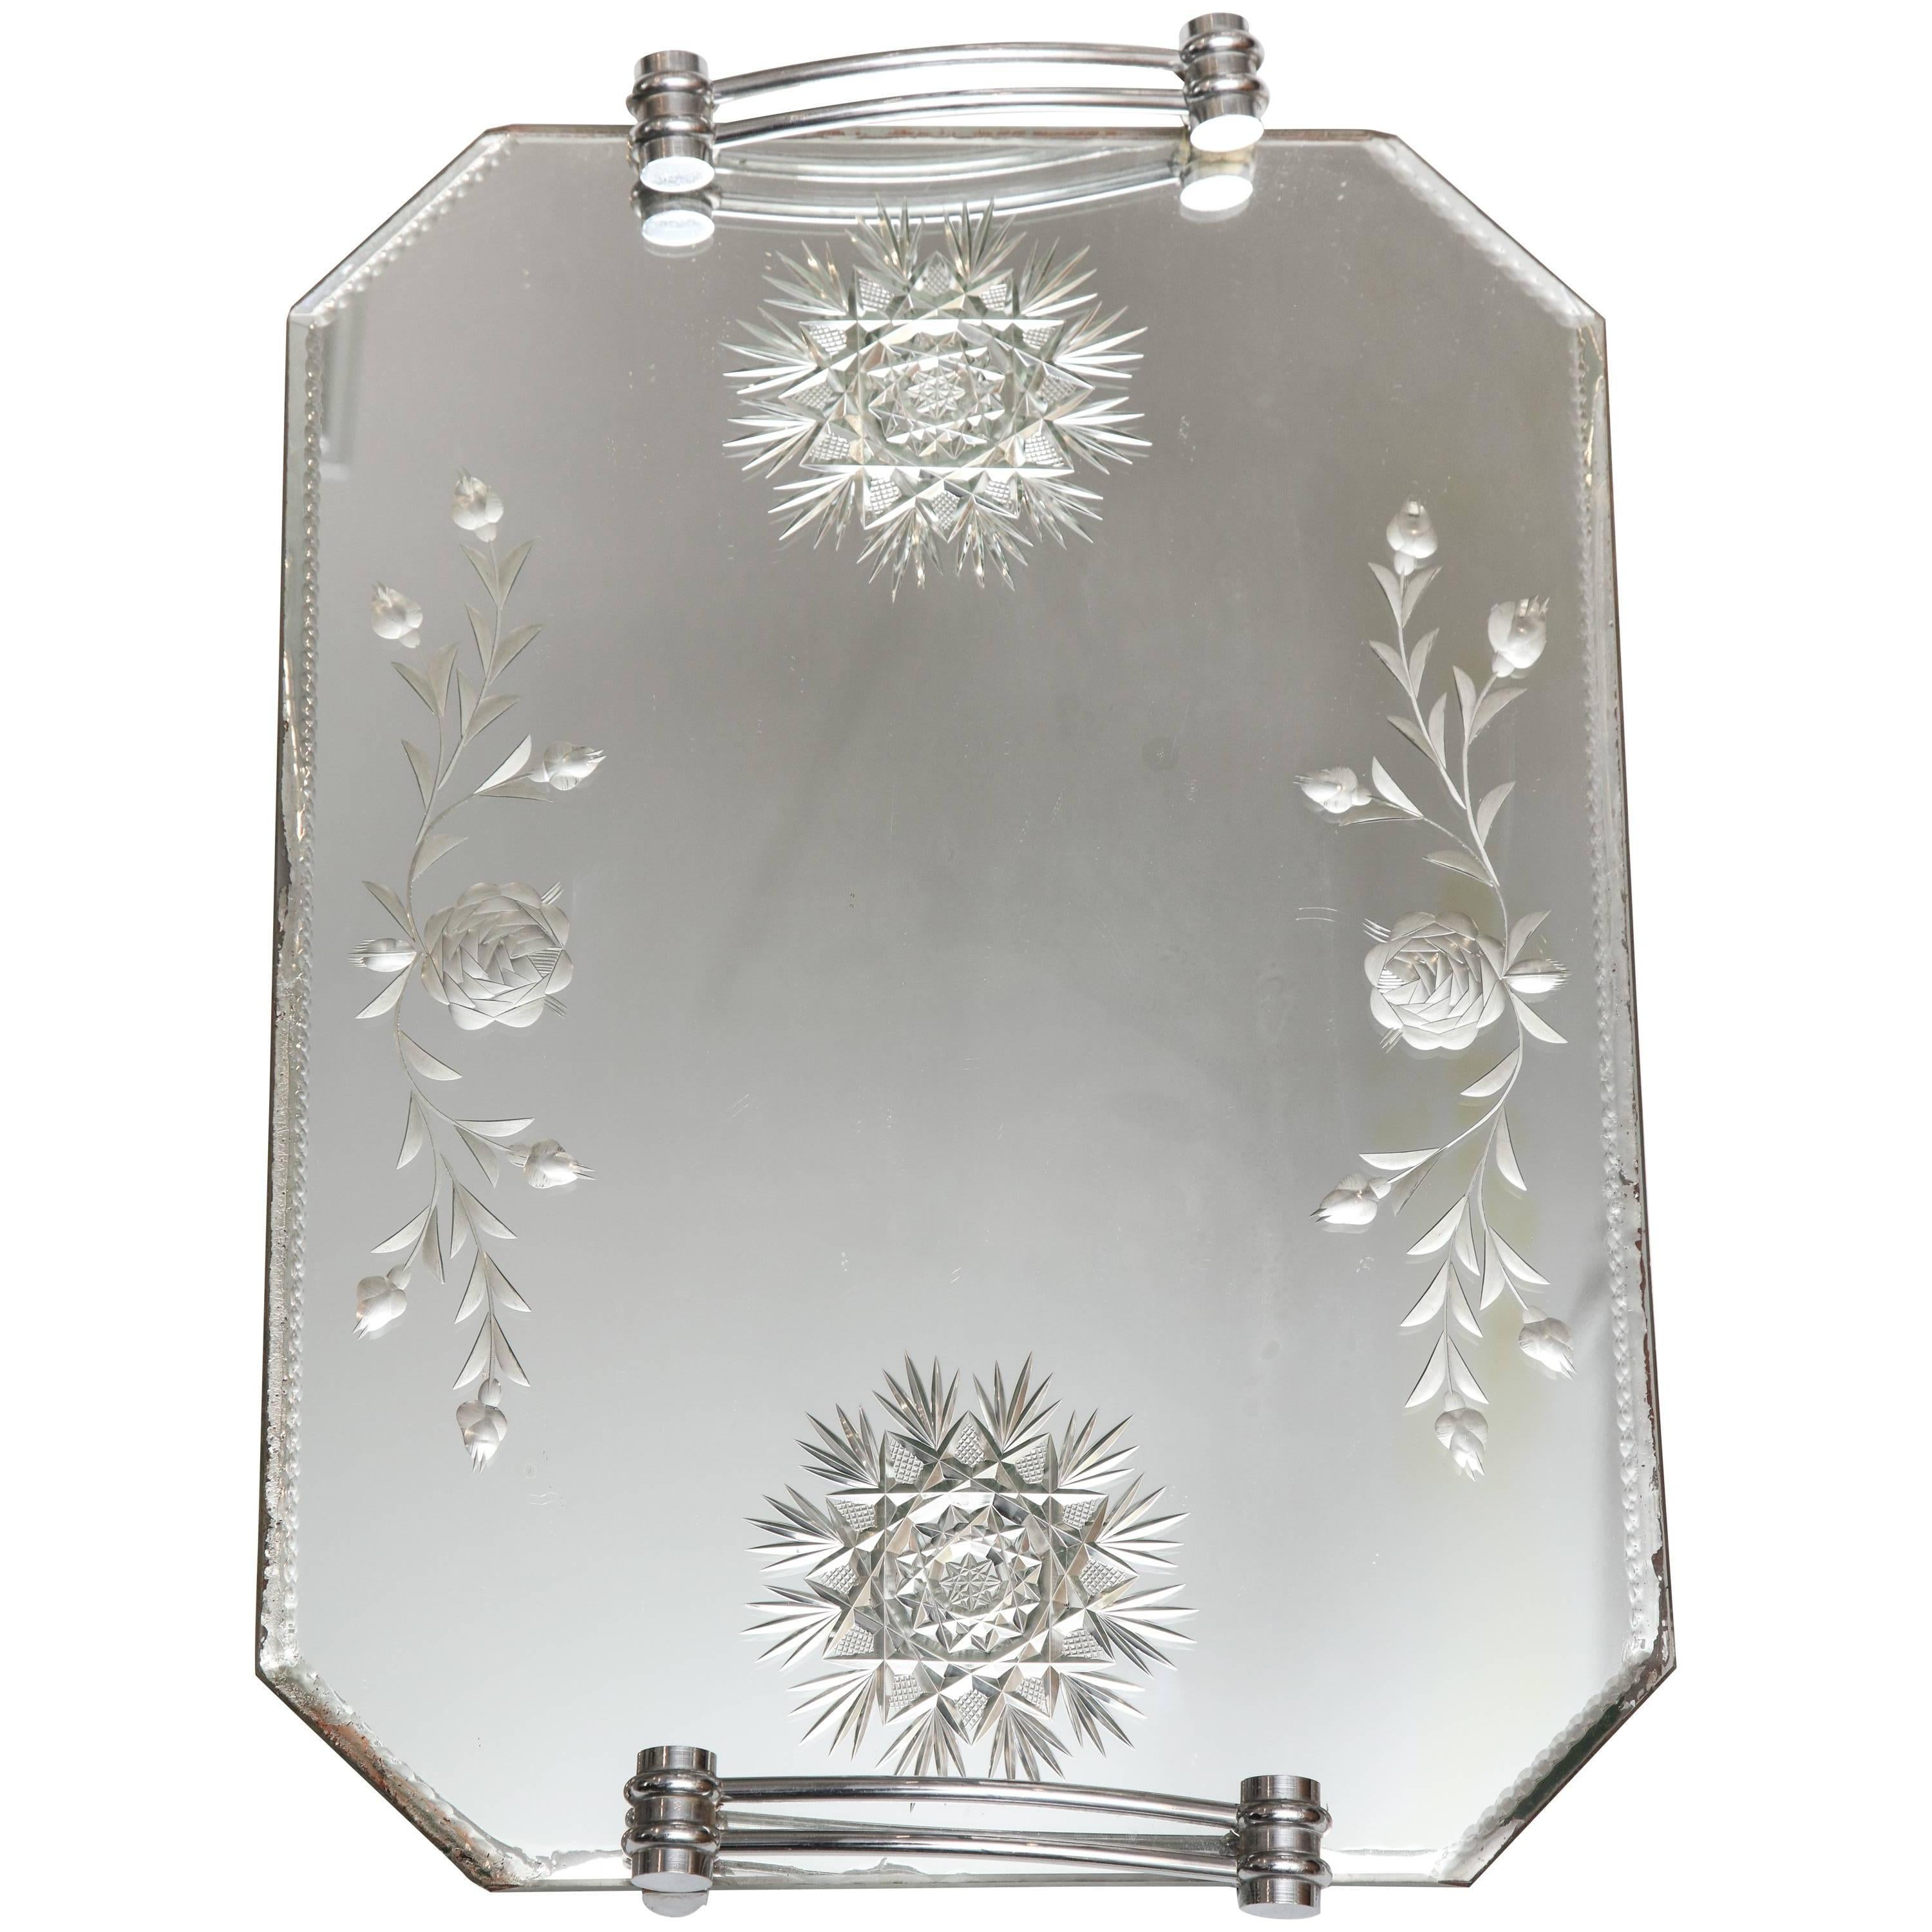  French Mirrored Vanity / Bar Tray  Hand Cut and Etched